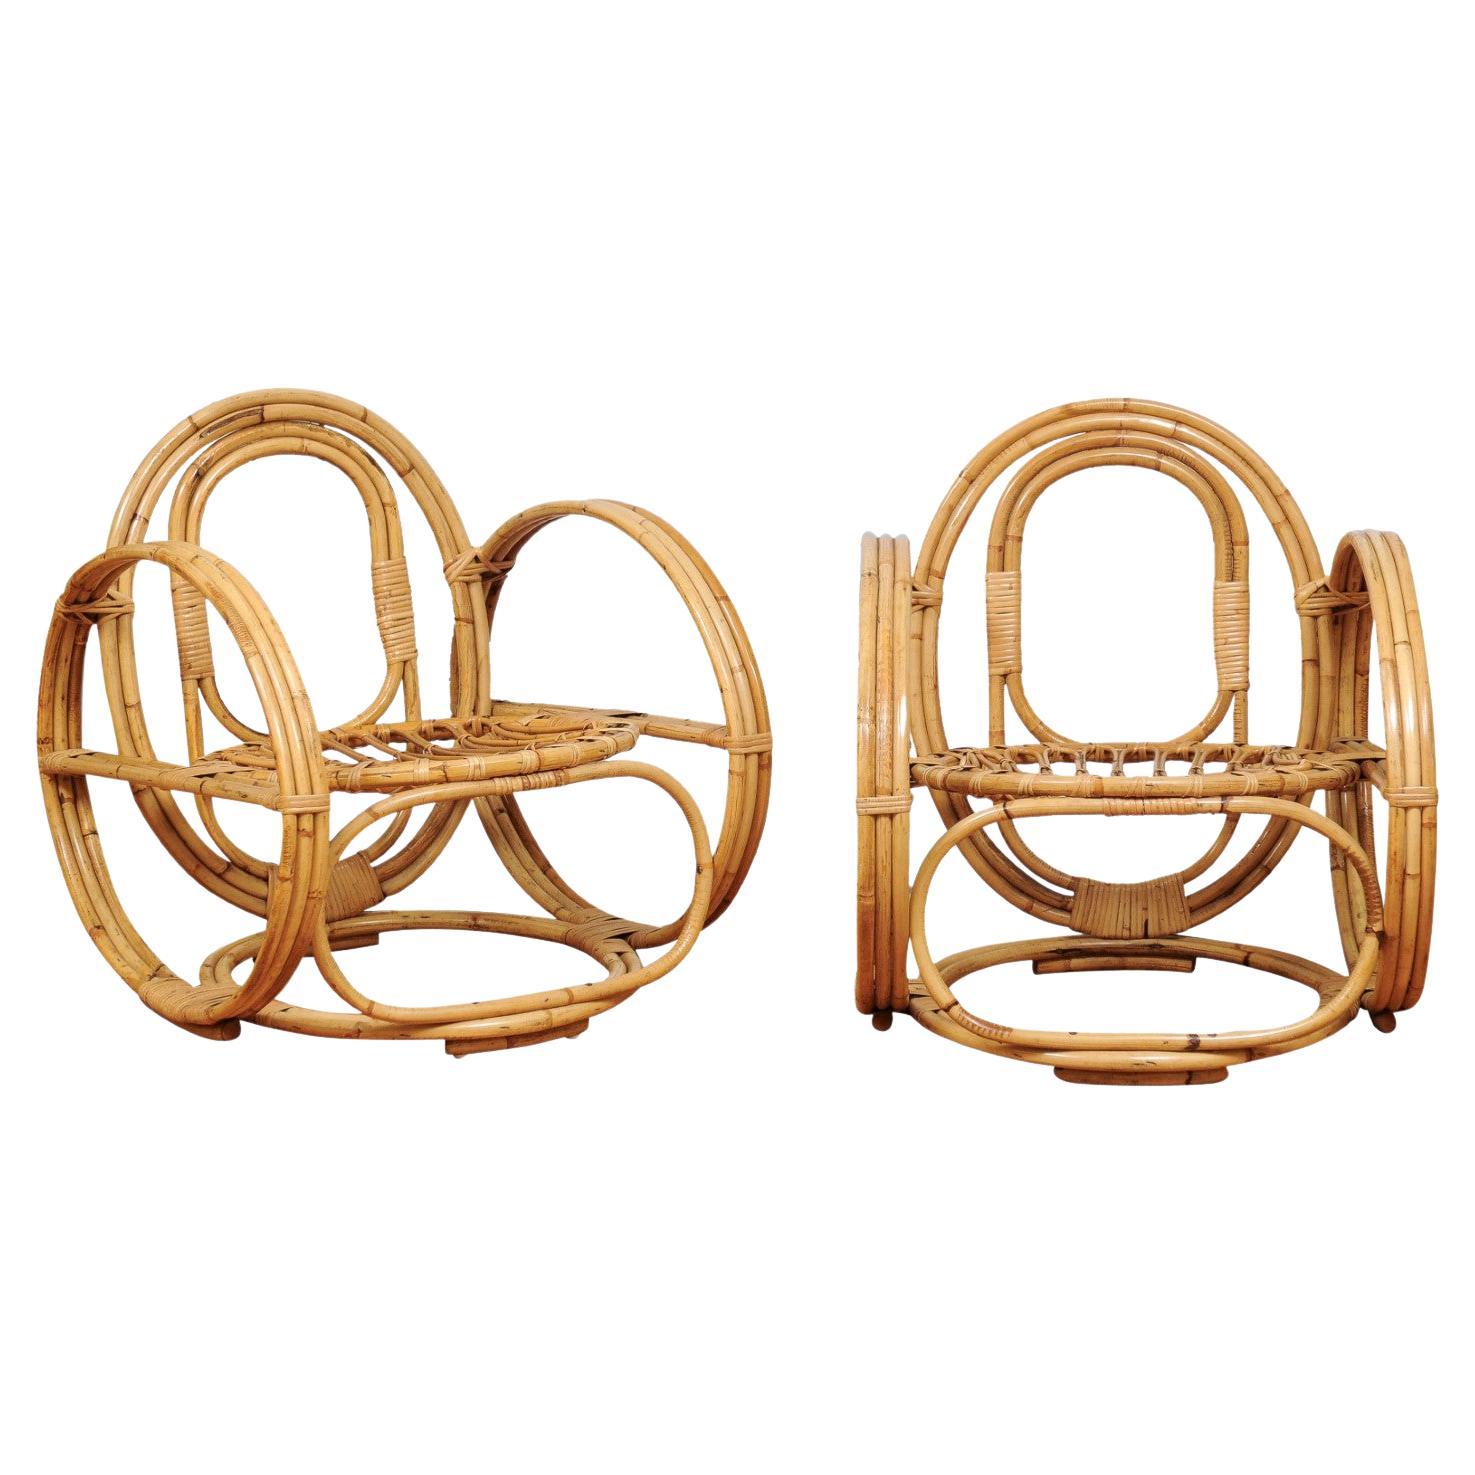 Fabulous Restored Pair of "Circles" Rattan and Cane Loungers, France, circa 1950 For Sale